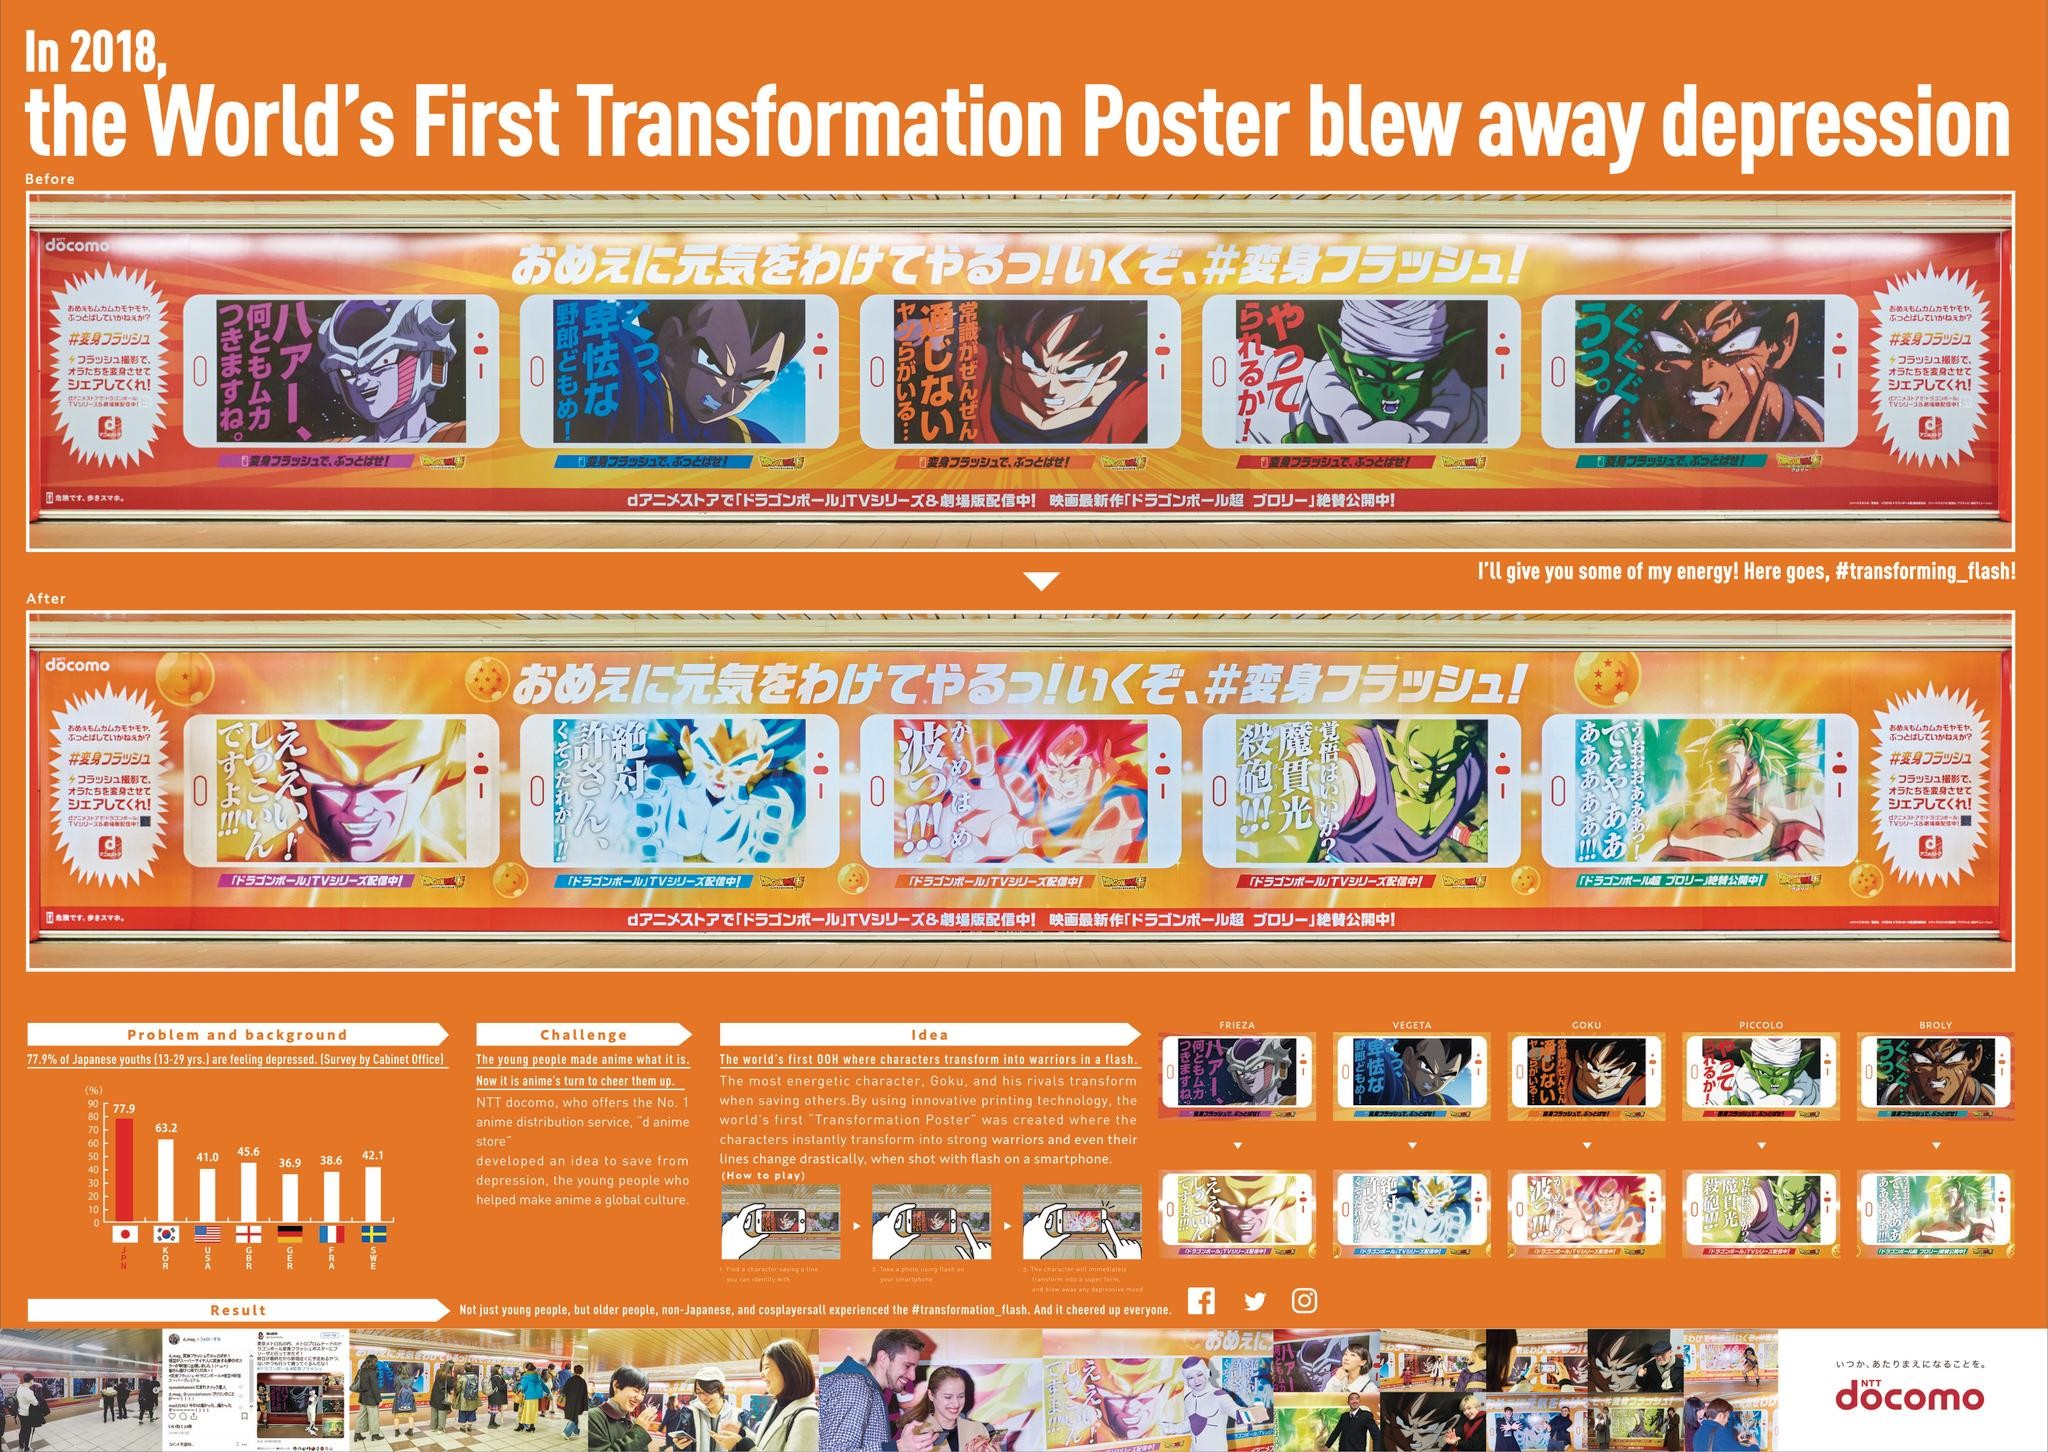 The World’s First Transformation Poster blew away depression